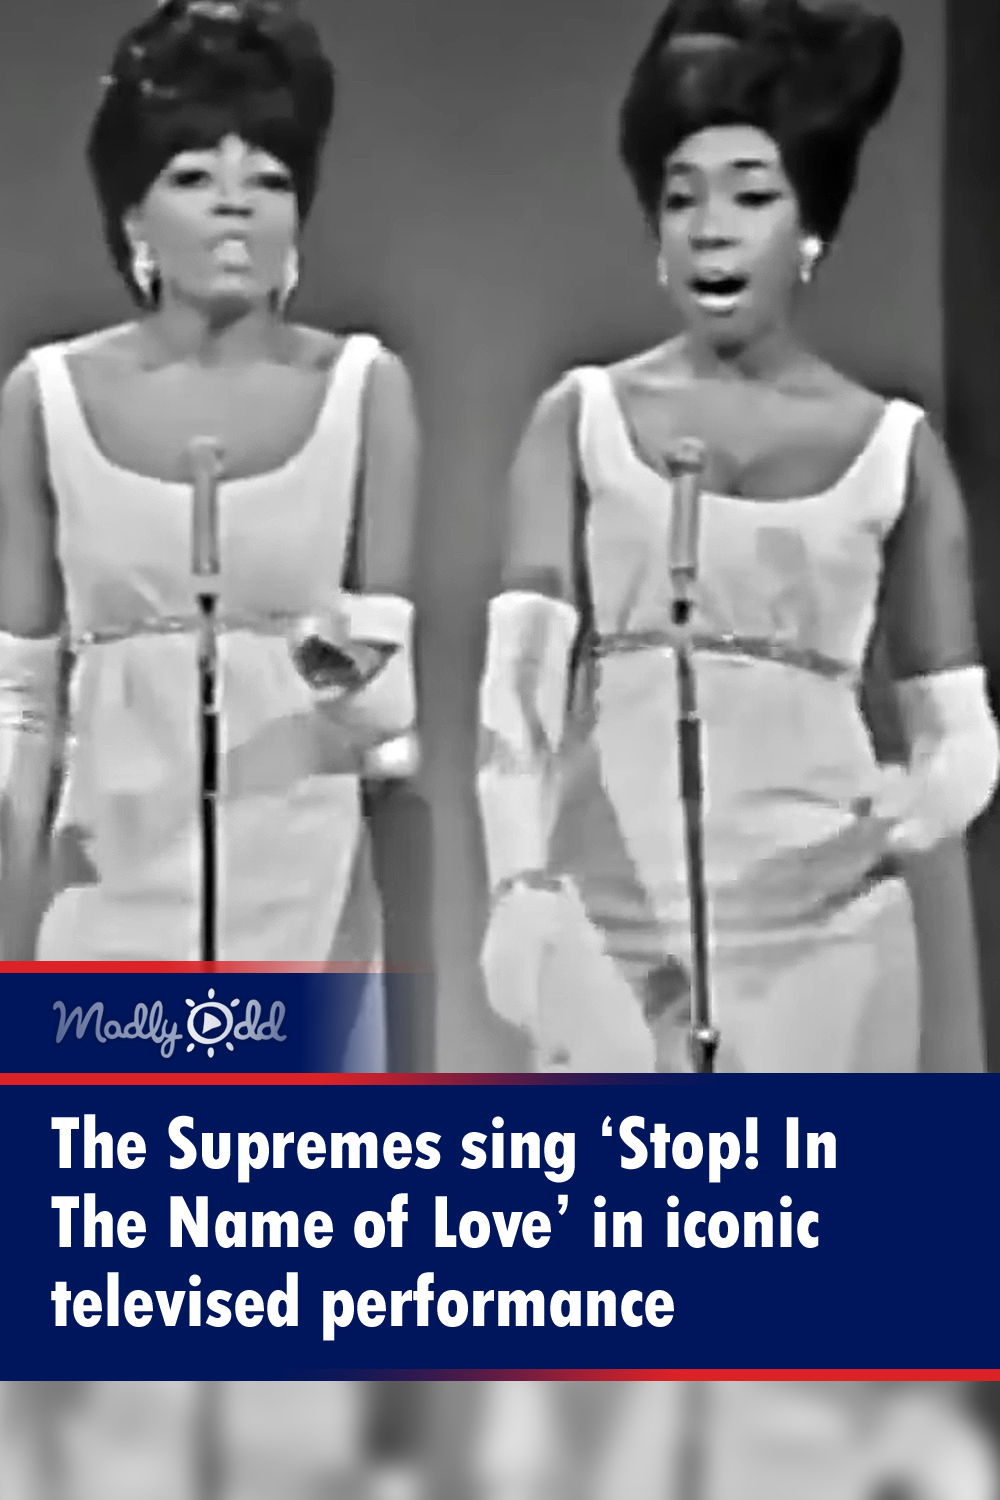 The Supremes sing ‘Stop! In The Name of Love’ in iconic televised performance